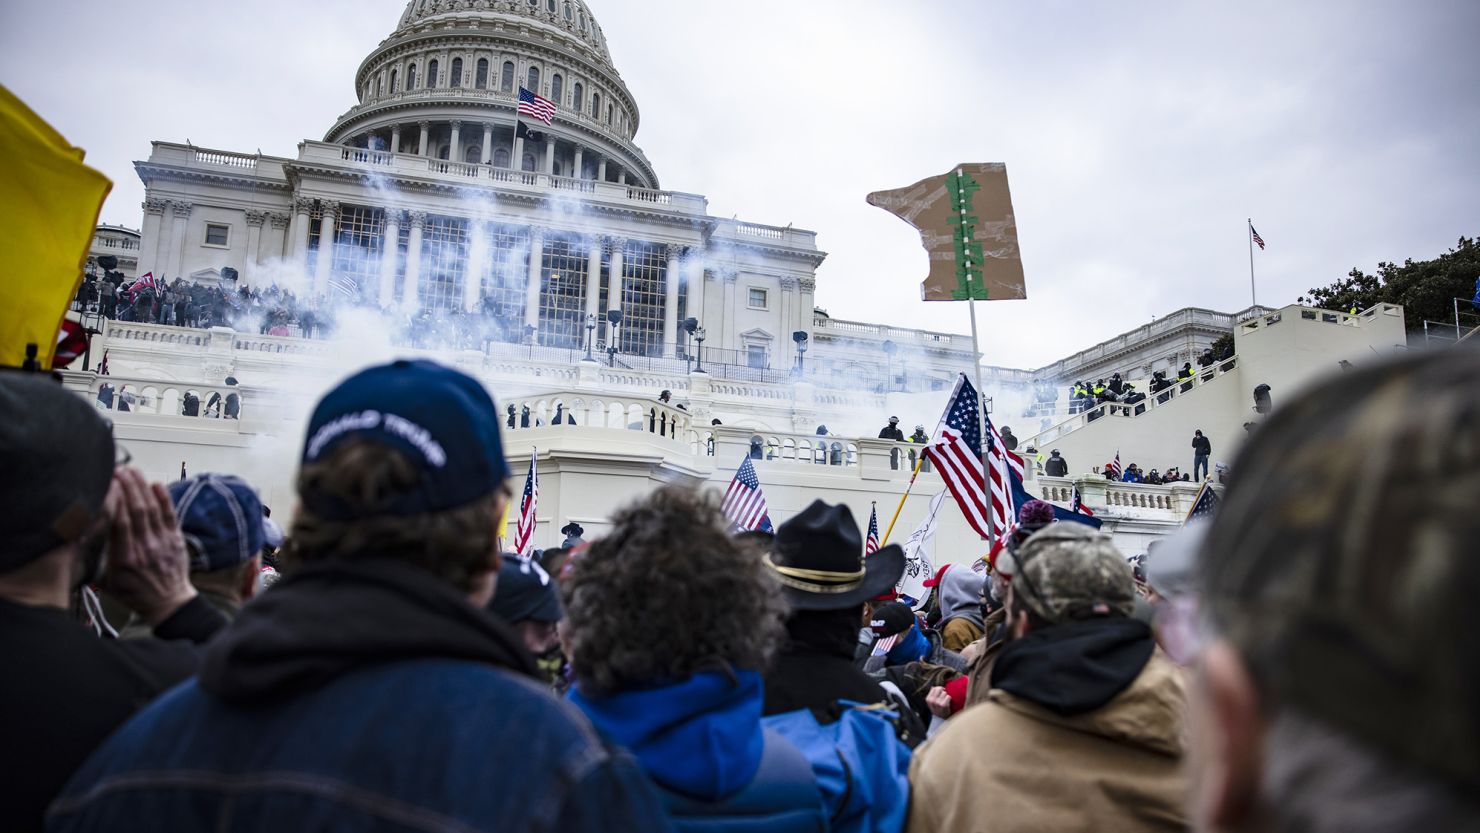 Pro-Trump supporters storm the U.S. Capitol following a rally with President Donald Trump on January 6, 2021 in Washington.